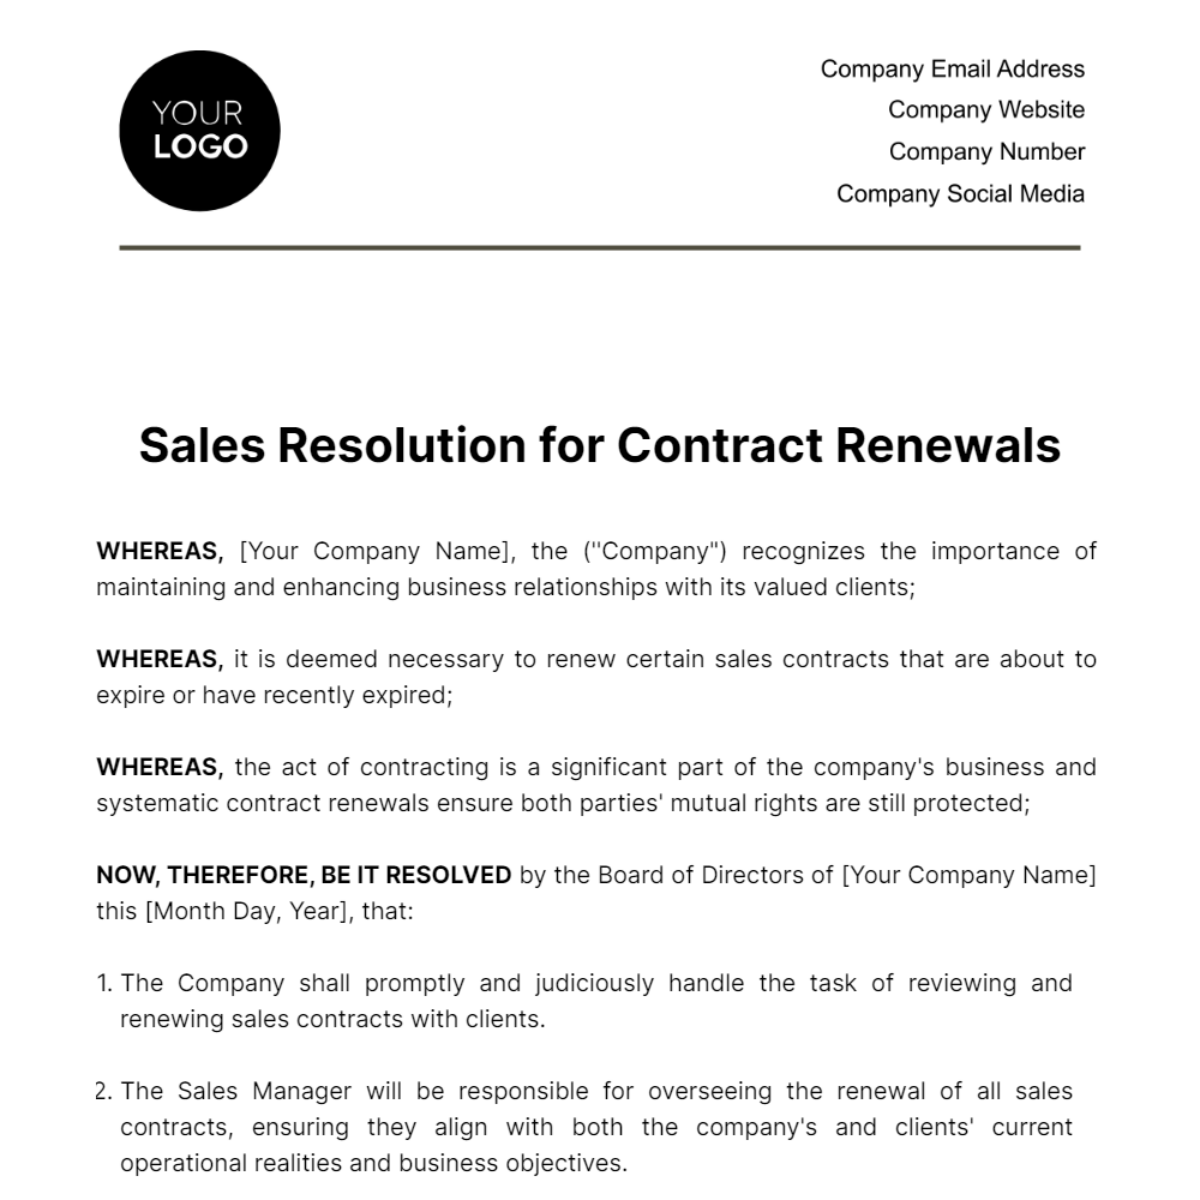 Free Sales Resolution for Contract Renewals Template